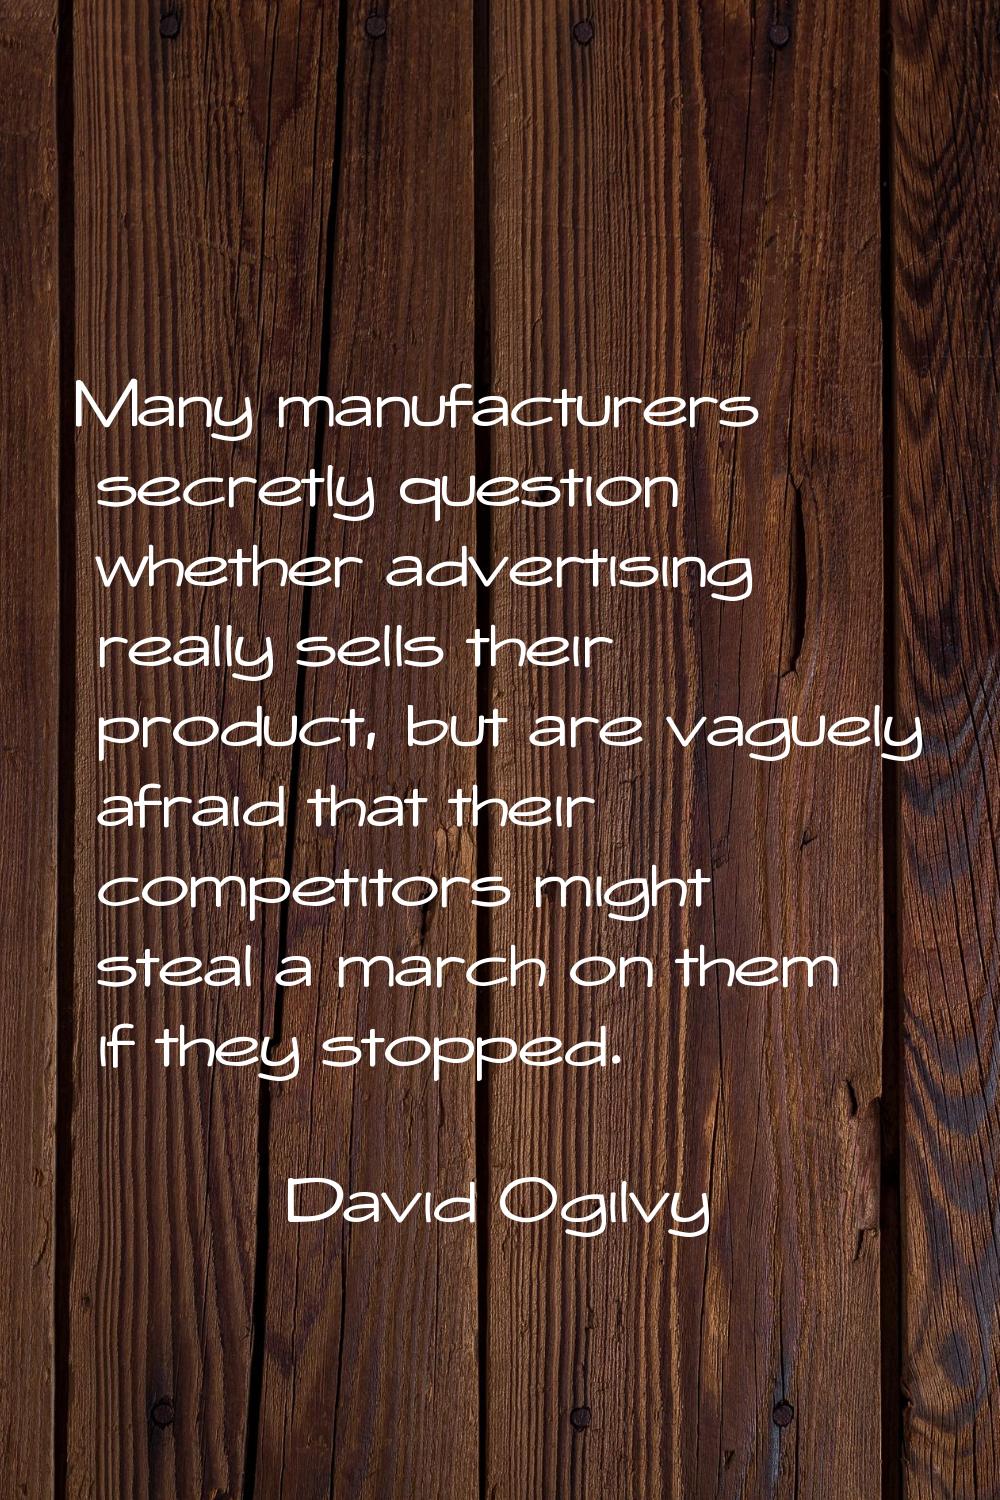 Many manufacturers secretly question whether advertising really sells their product, but are vaguel